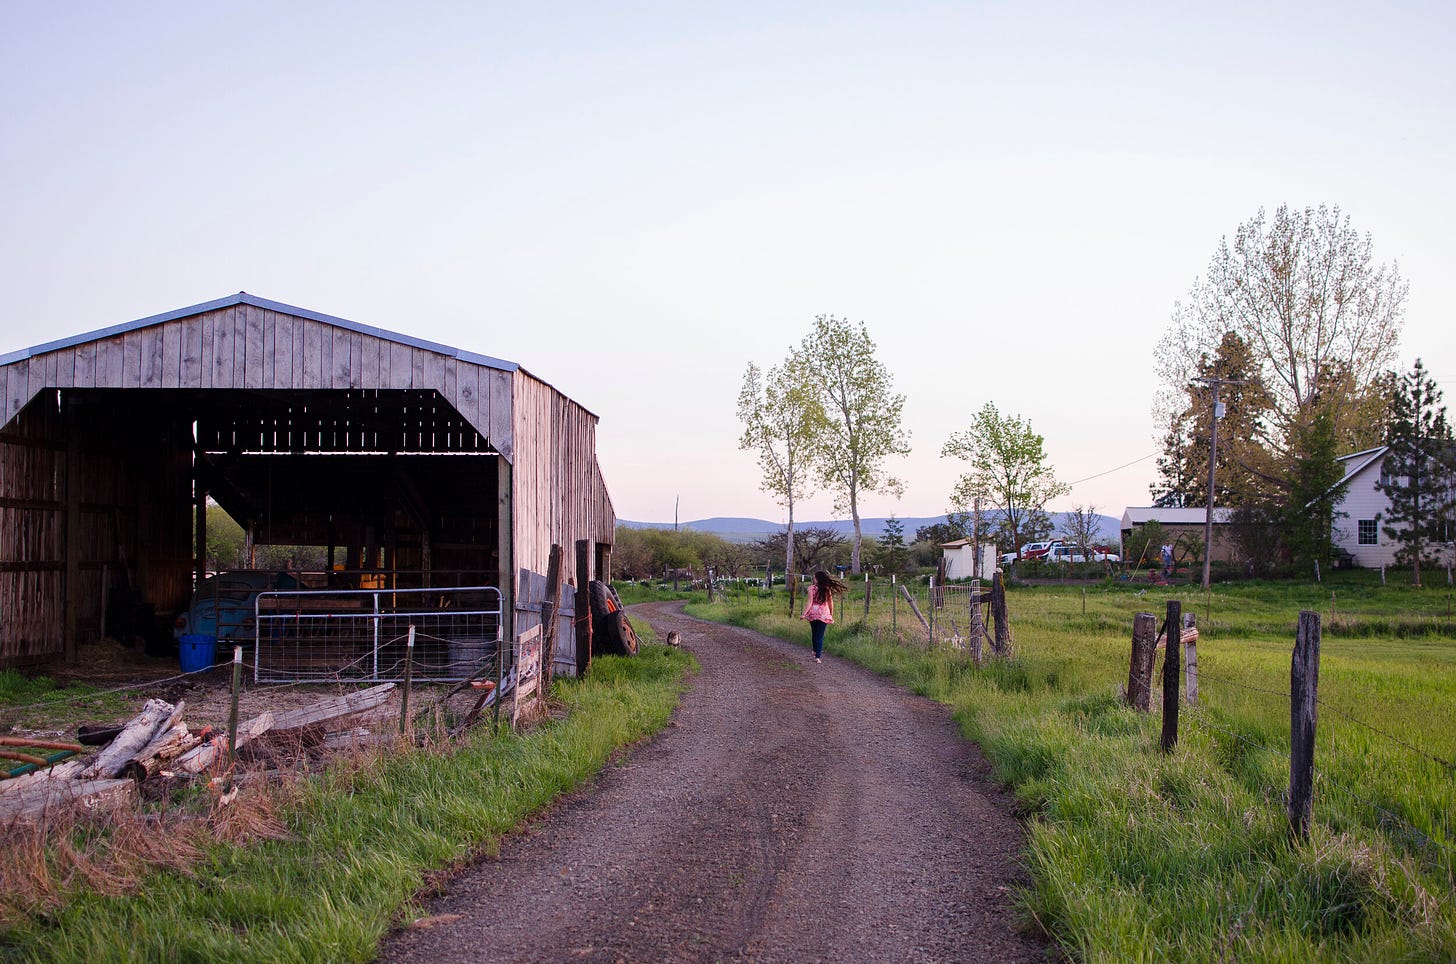 How growing up on a farm helps me study the Bible